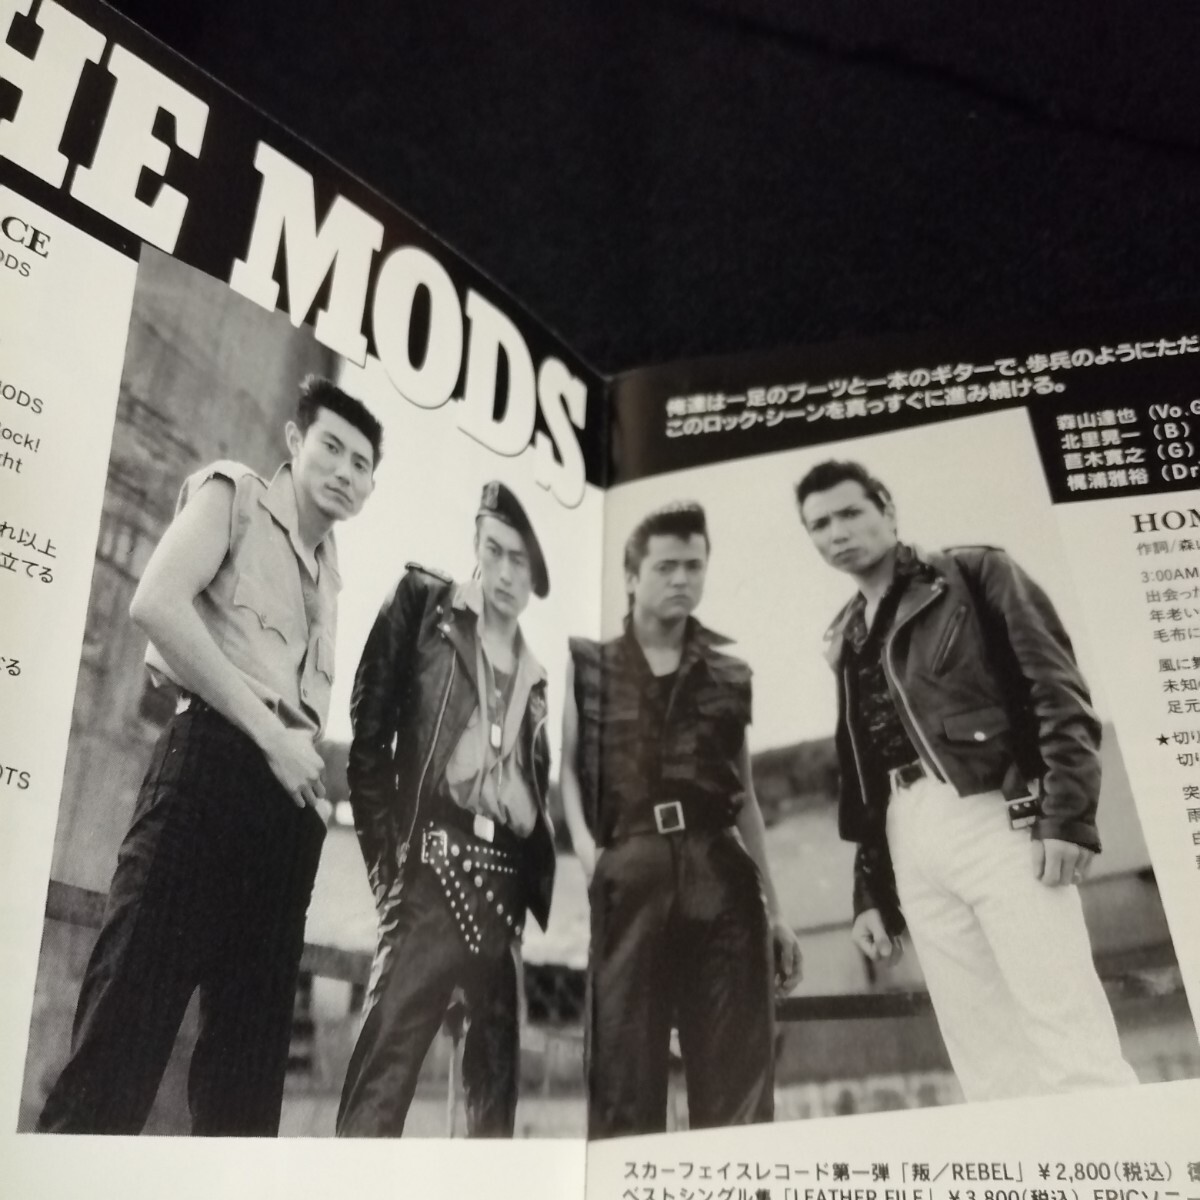 D05 中古CD　SCAR FACES オムニバスインディーズ　SCA 8703 THE MODS JACK KNIFE THE 100-s 風来坊　THE COLTS 森山達也_画像2